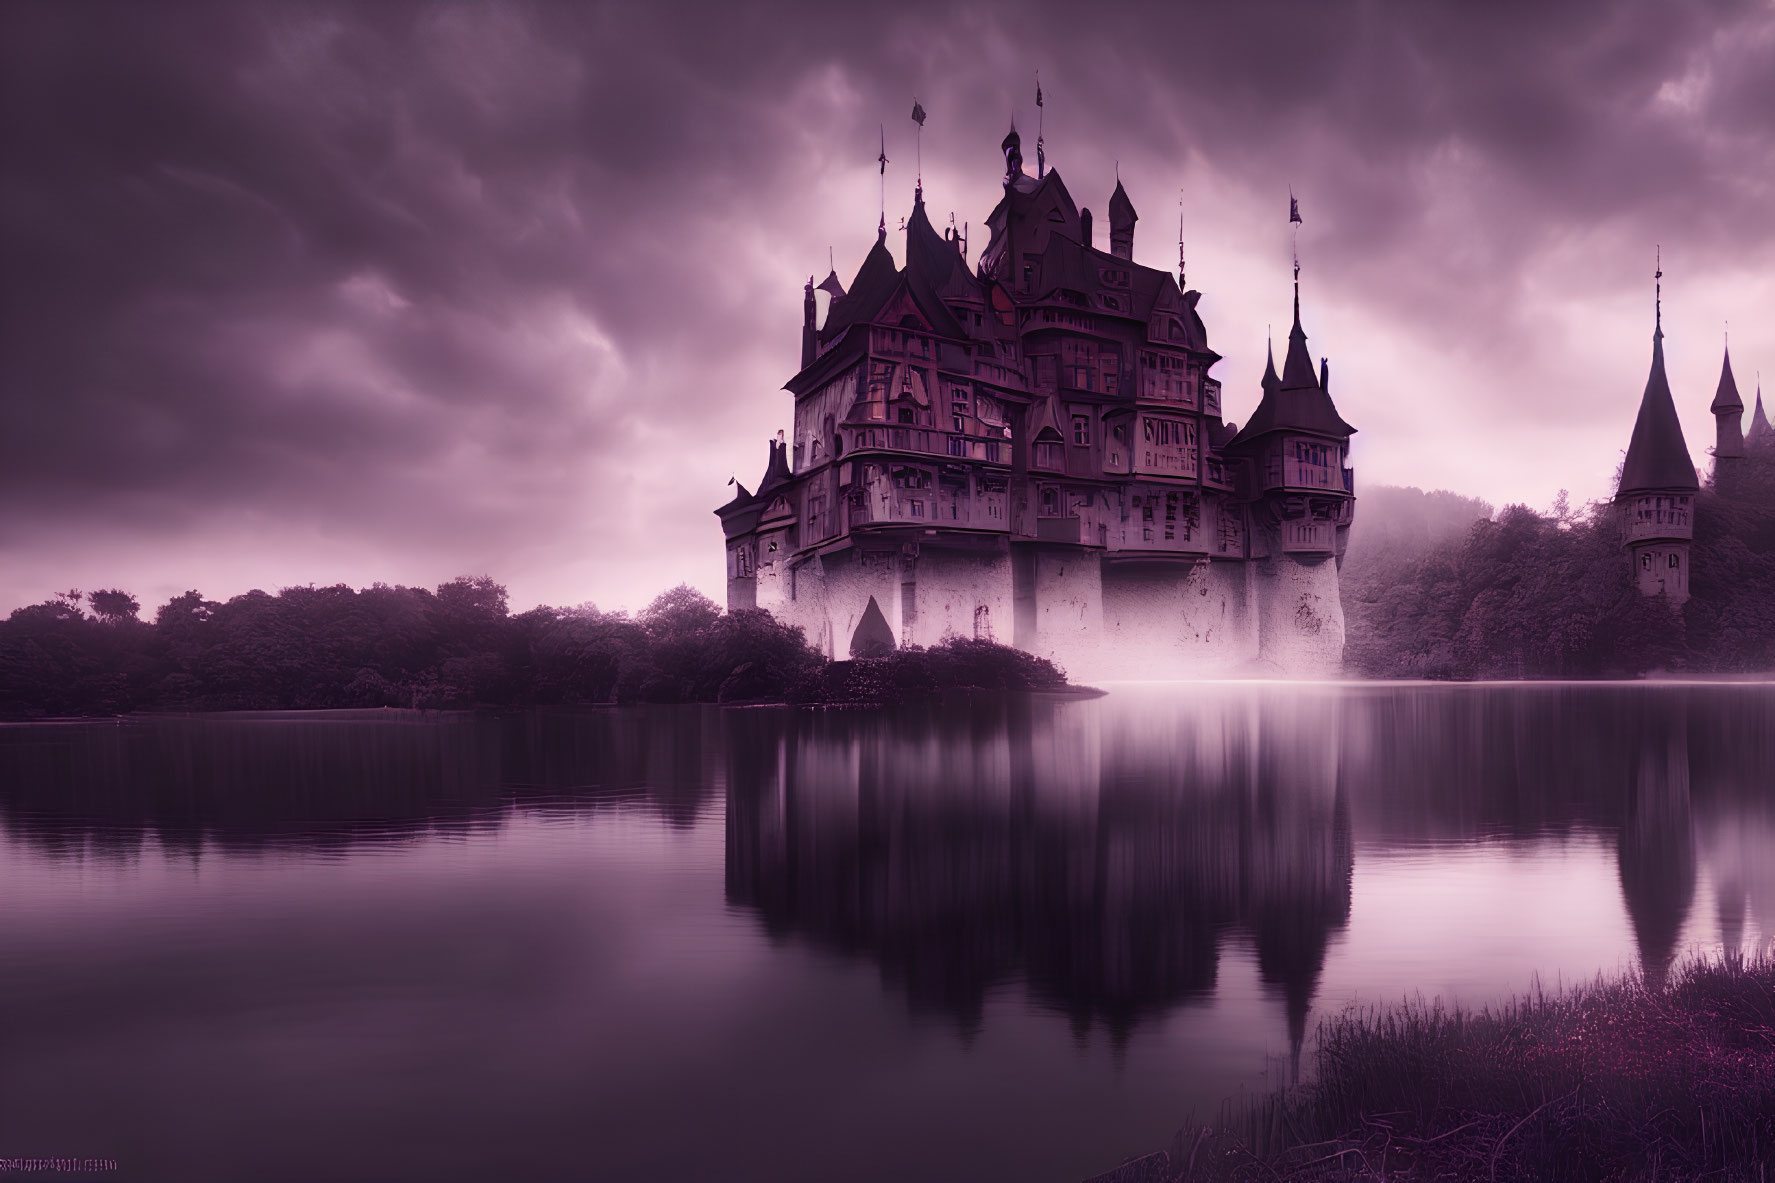 Majestic castle with spires and towers reflected in serene lake under purple sky